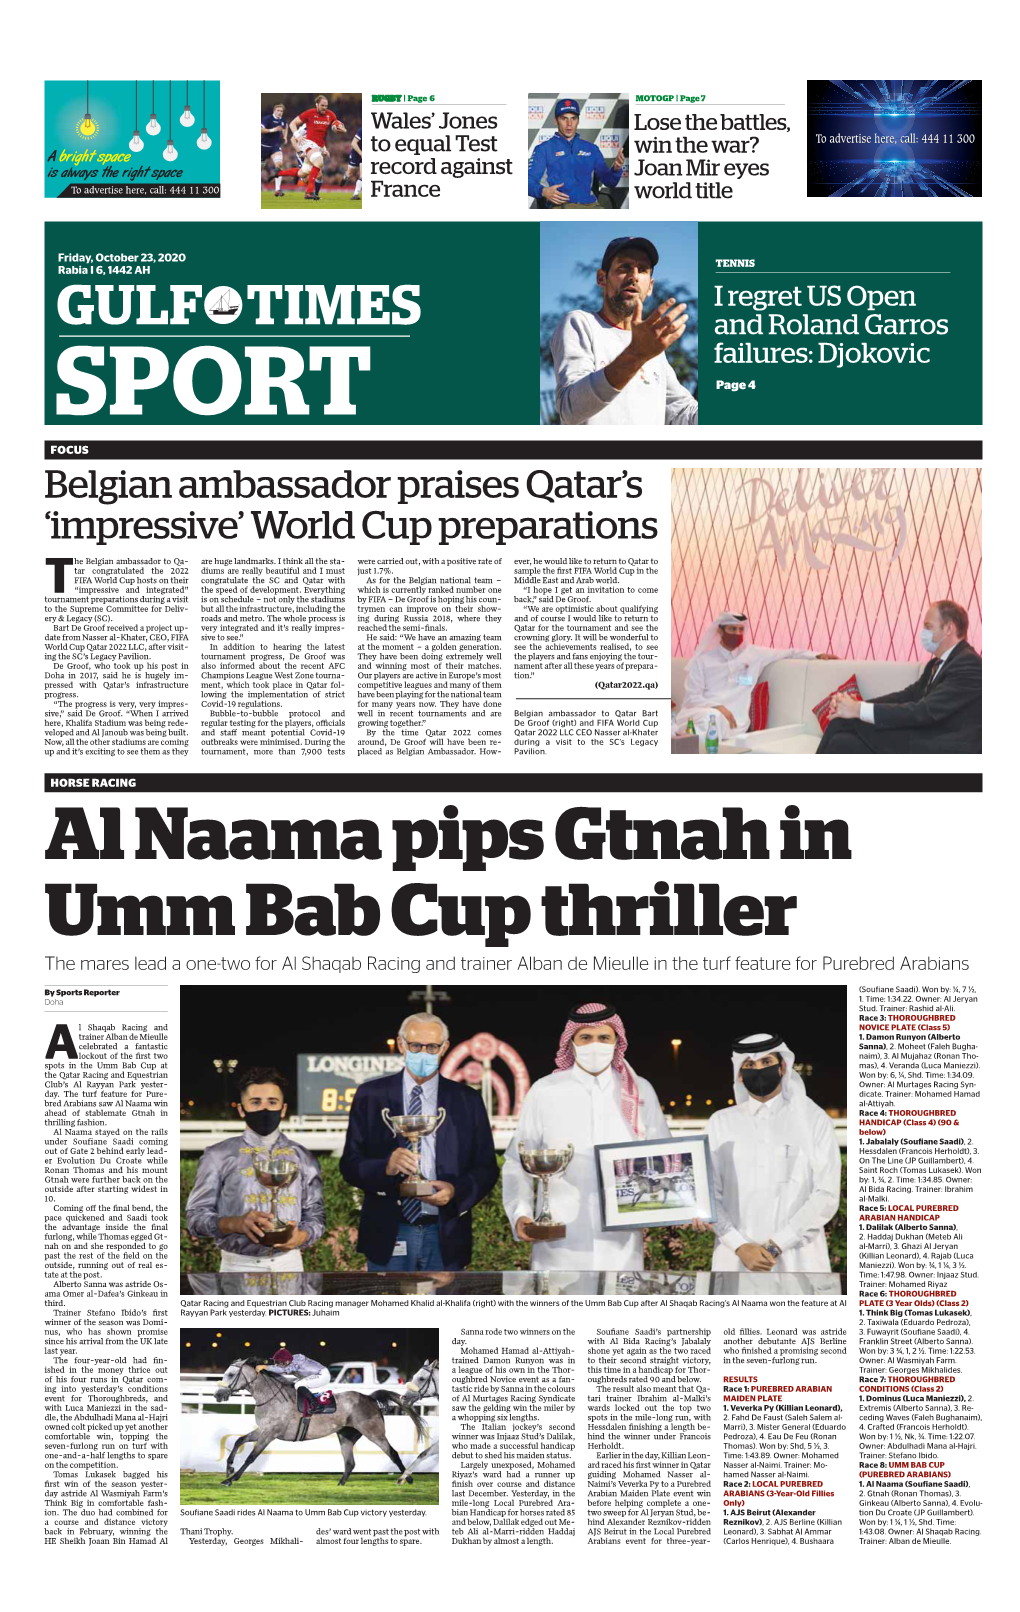 Al Naama Pips Gtnah in Umm Bab Cup Thriller the Mares Lead a One-Two for Al Shaqab Racing and Trainer Alban De Mieulle in the Turf Feature for Purebred Arabians